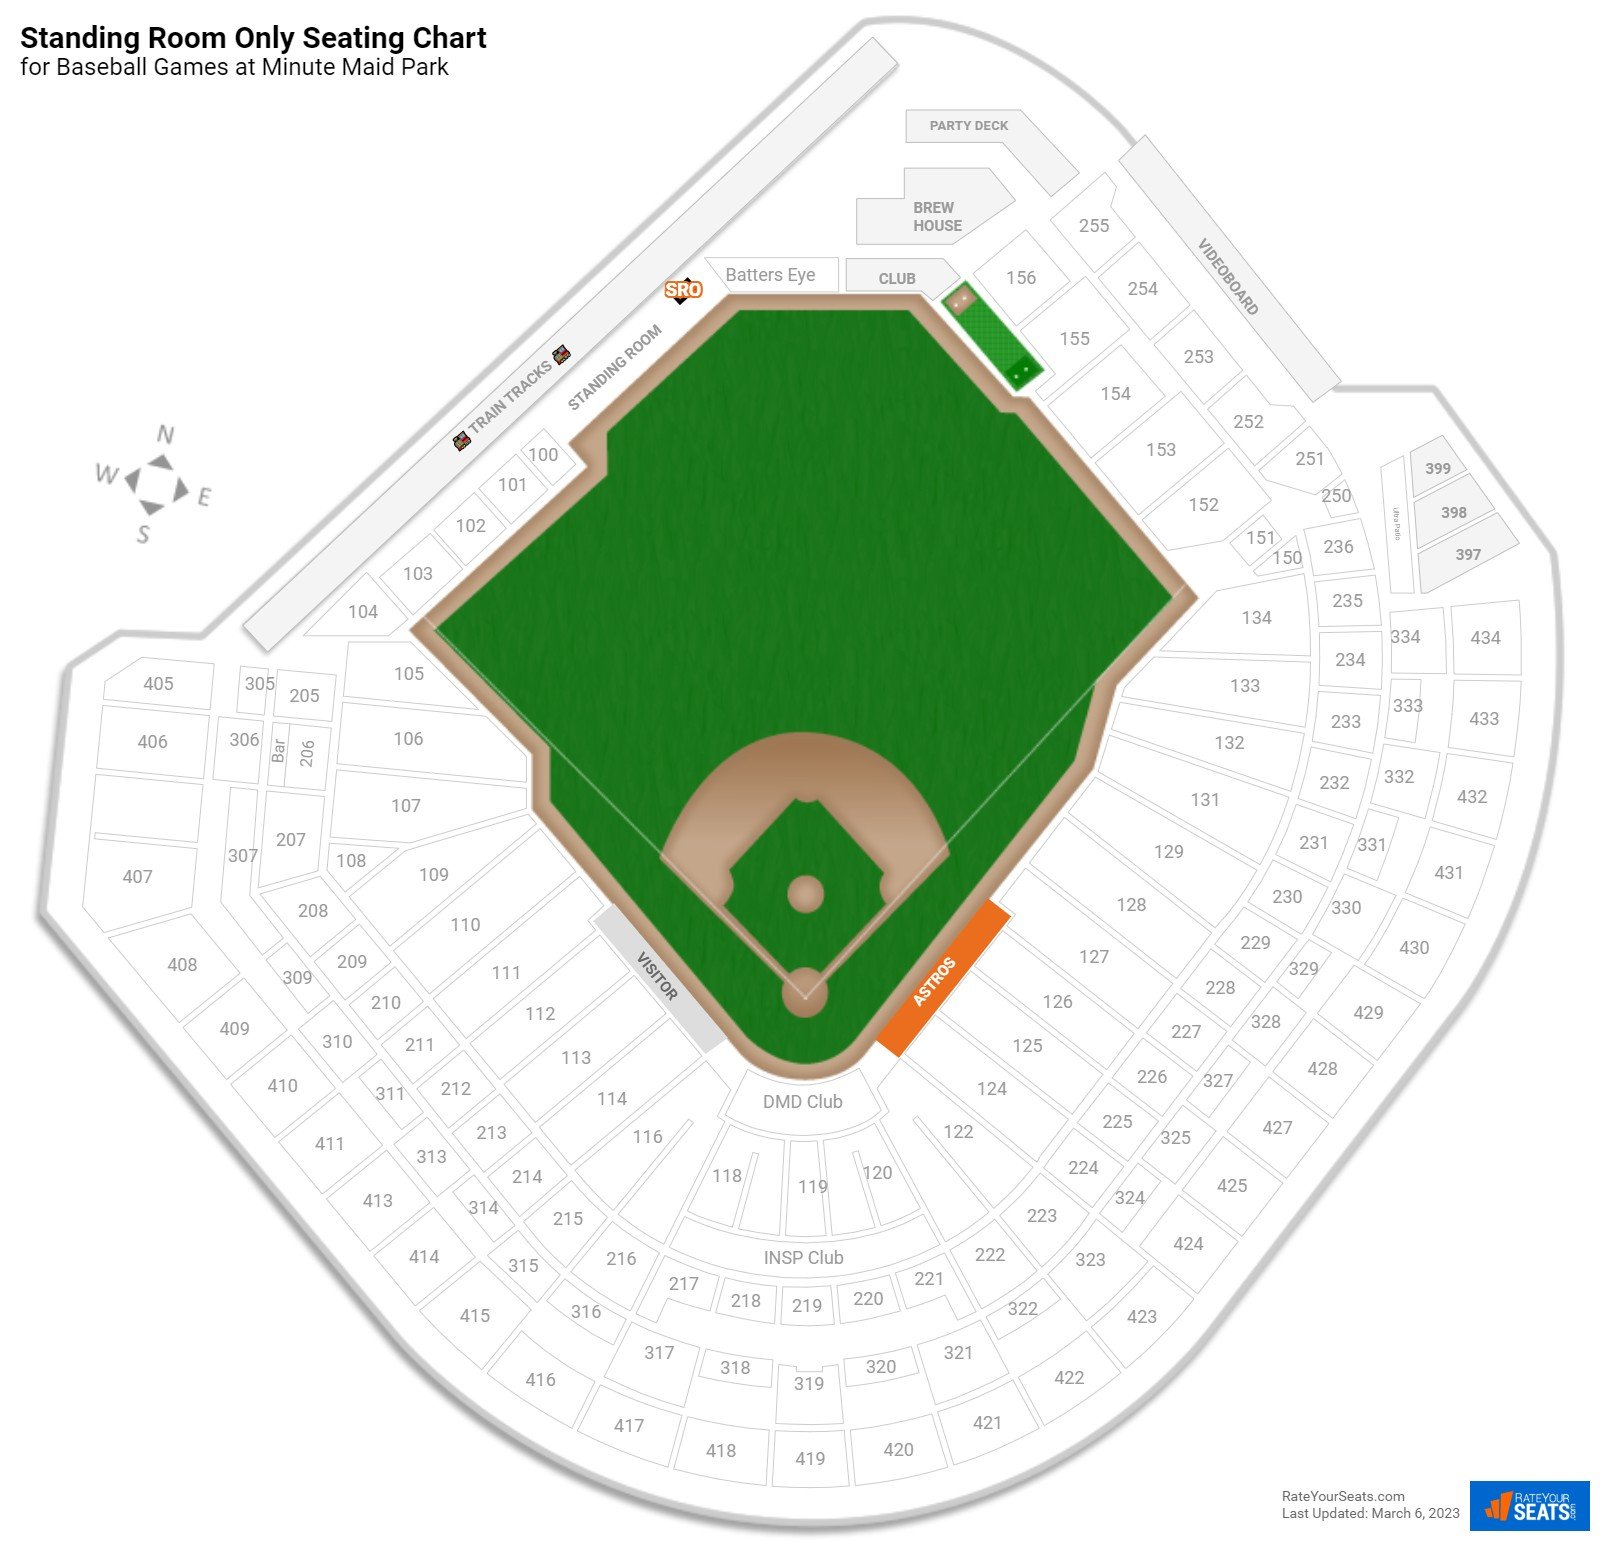 Baseball Standing Room Only Seating Chart at Minute Maid Park